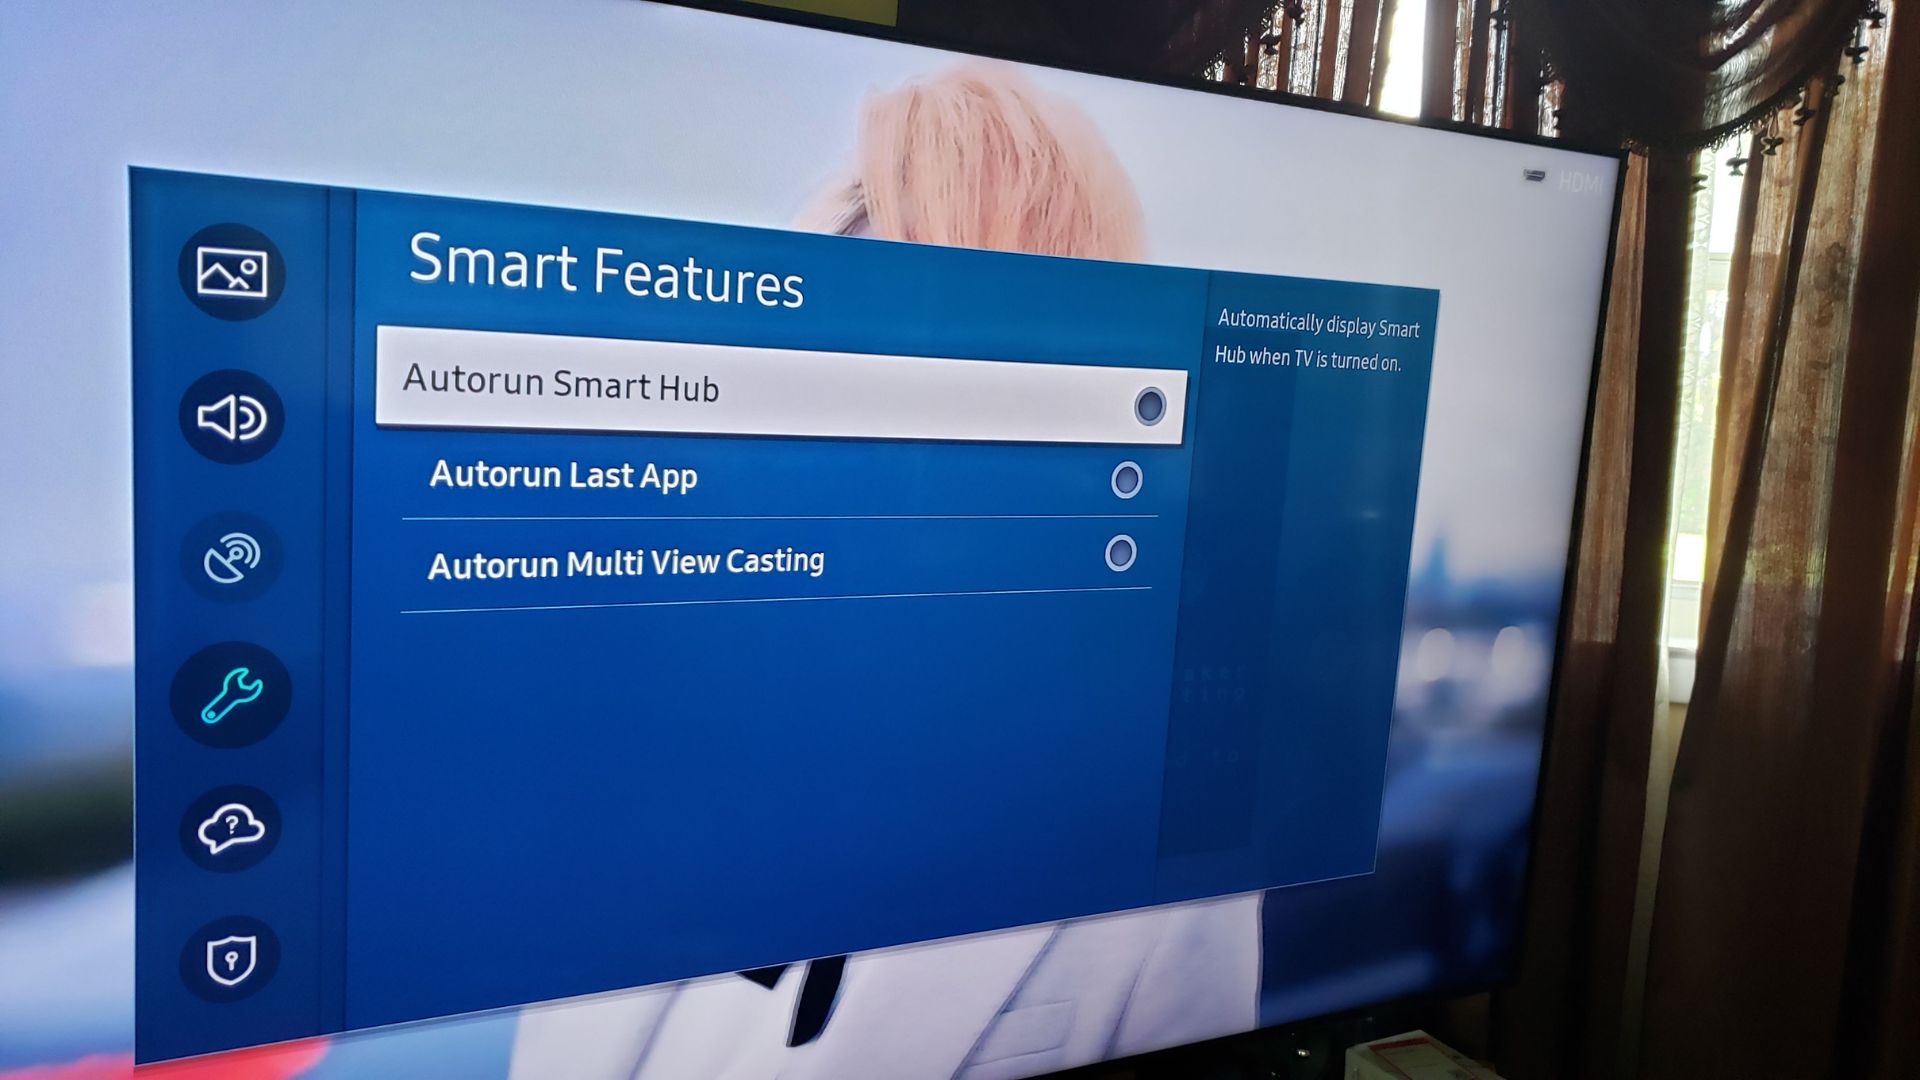 How Do I Change The Startup Screen On My Samsung Smart TV